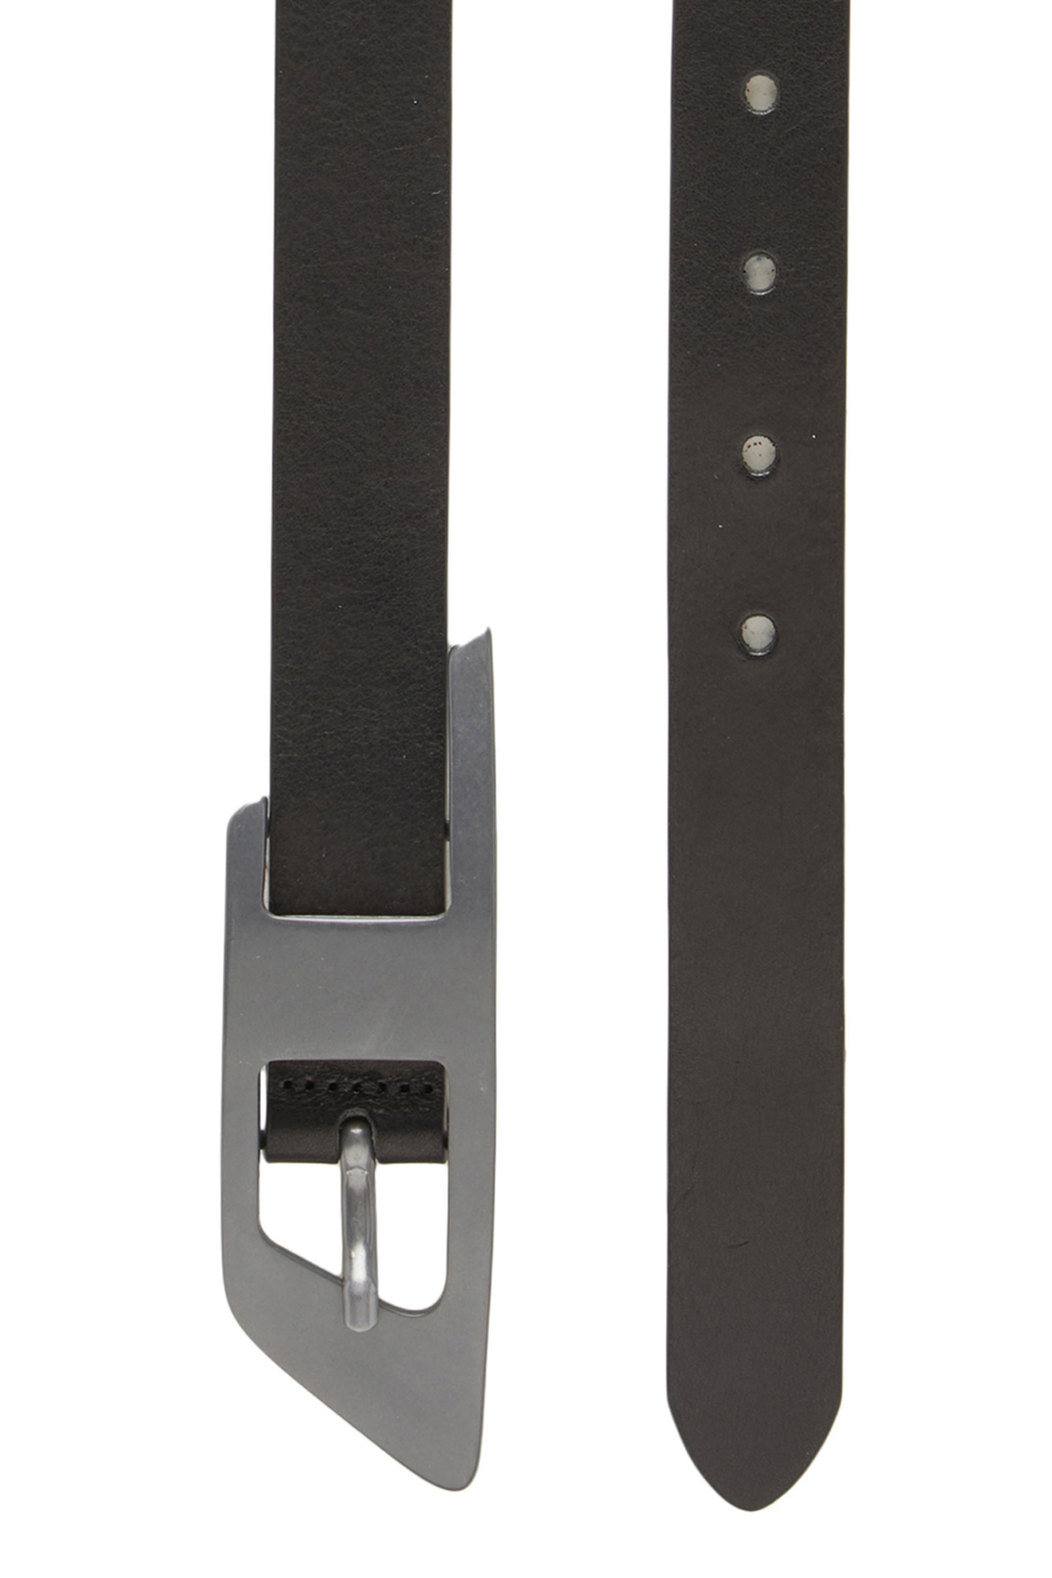 Leather belt with maxi D buckle